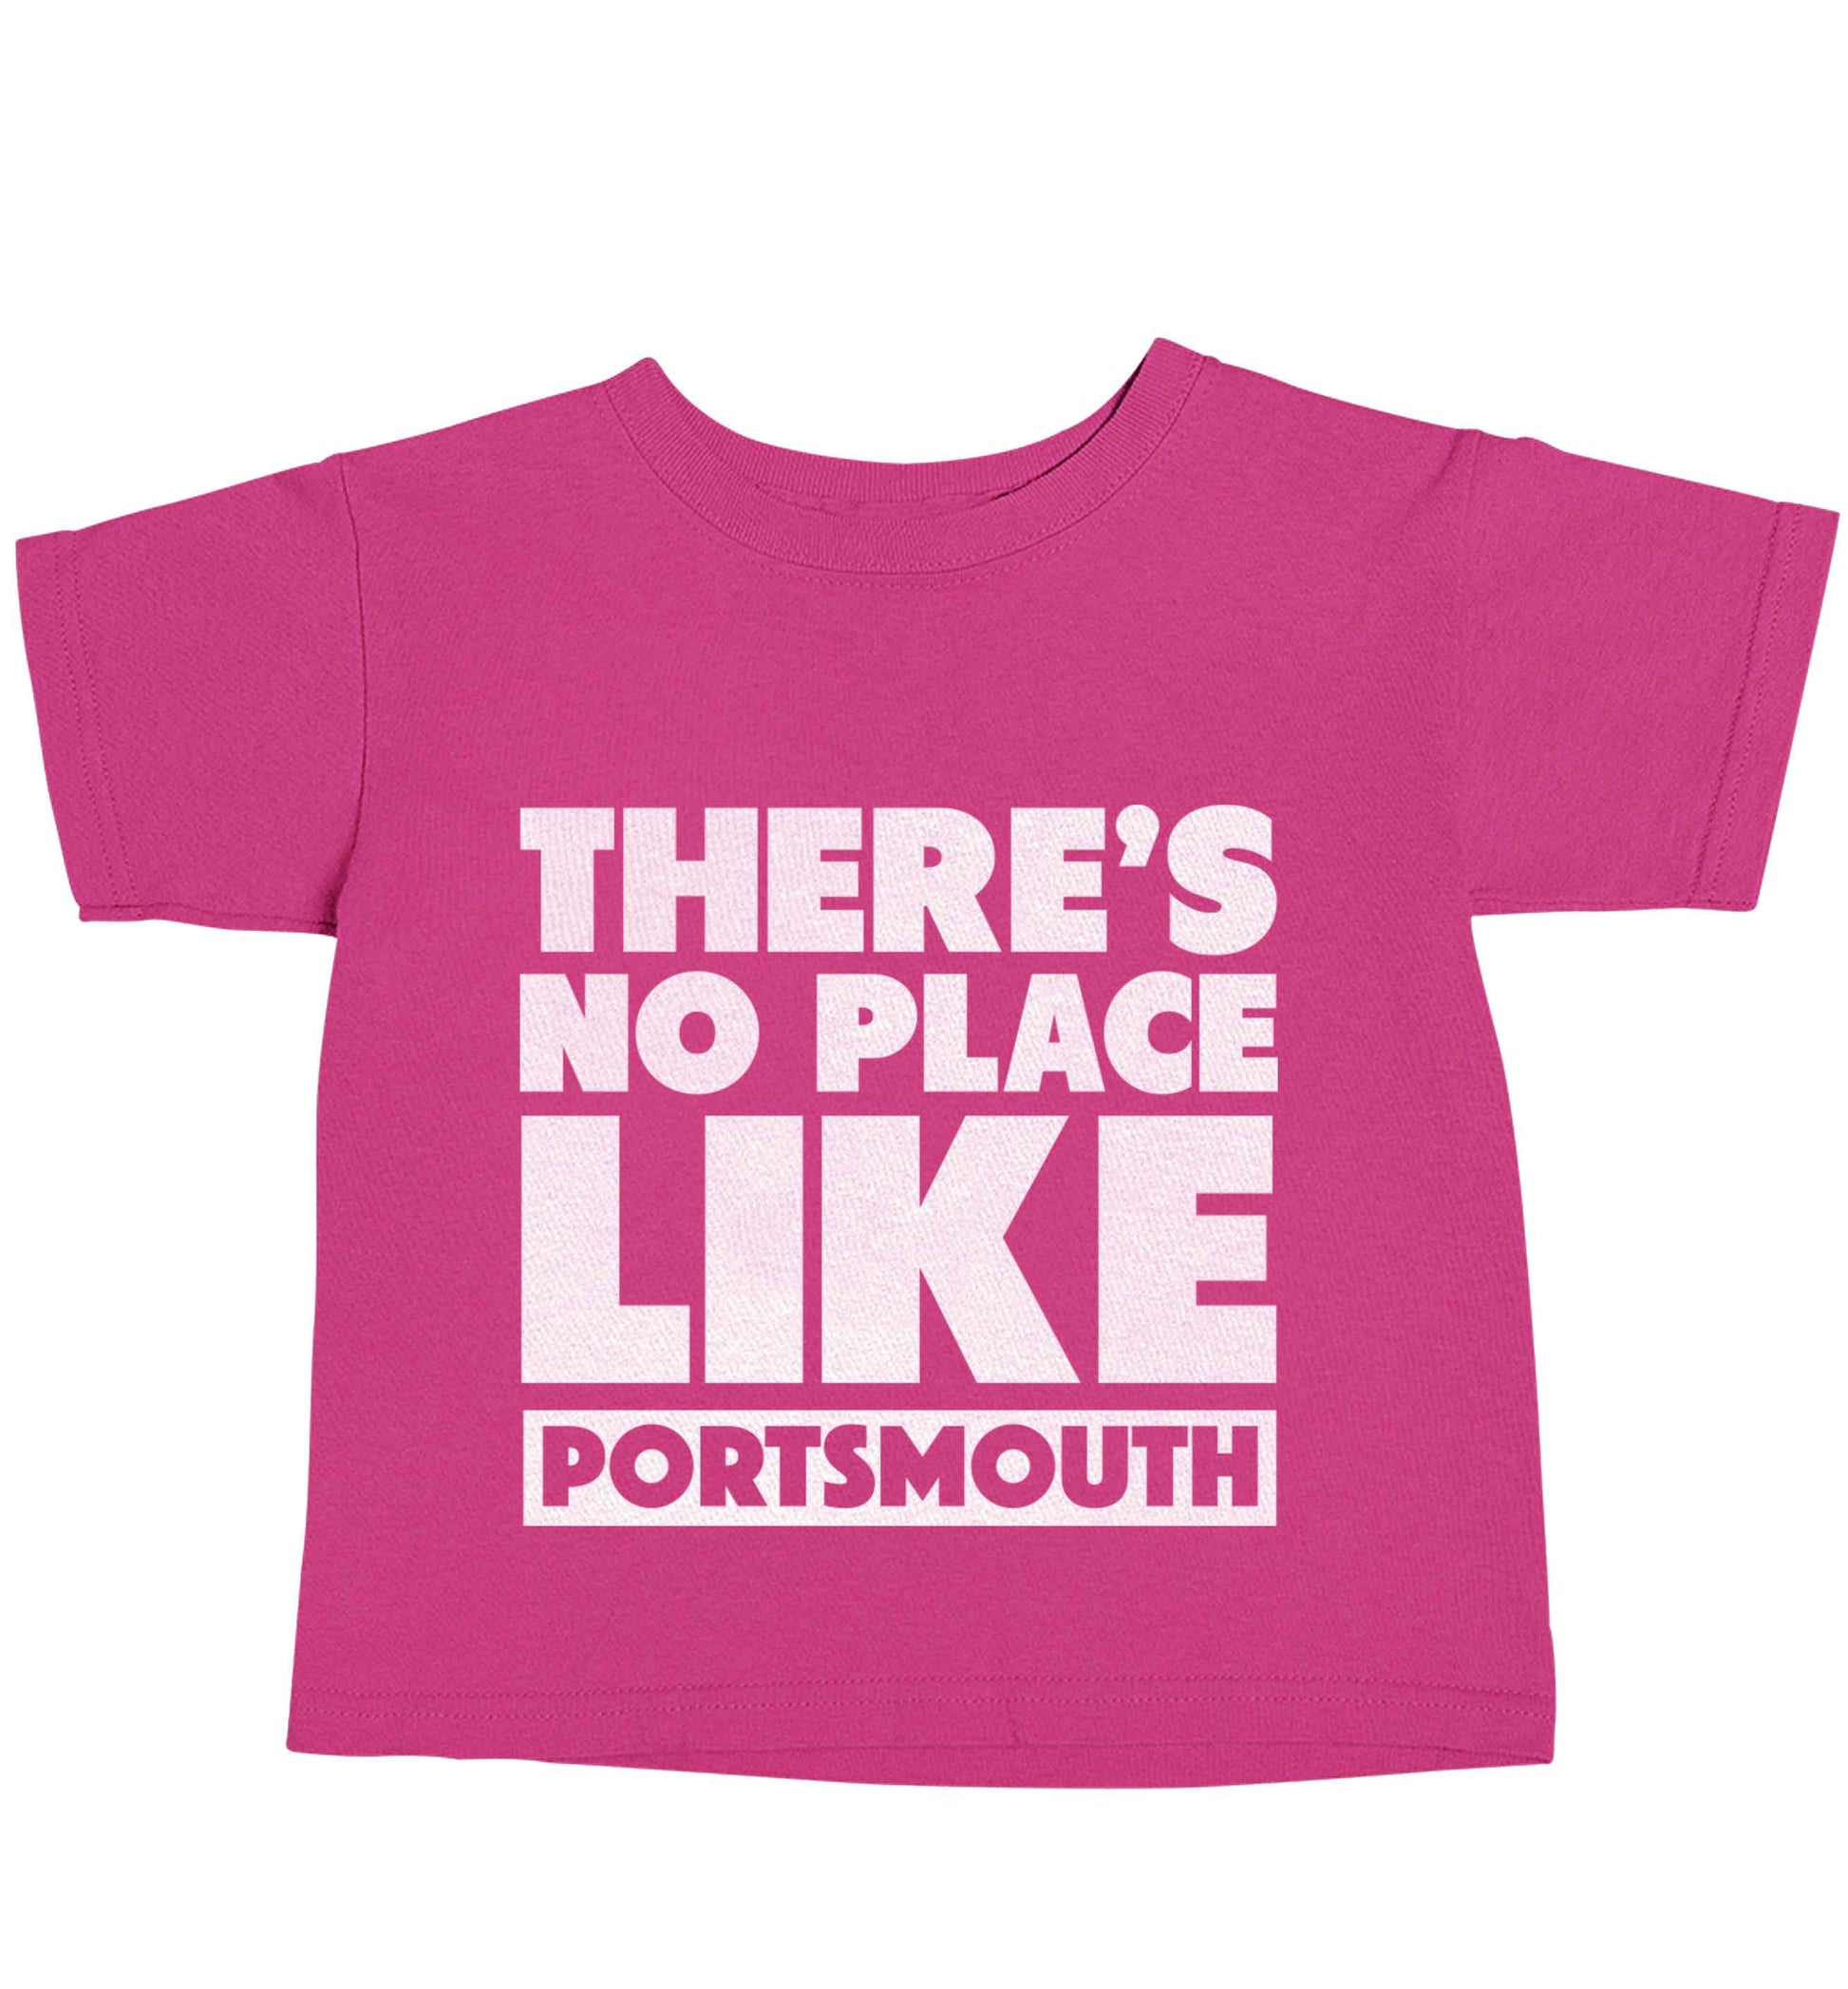 There's no place like Porstmouth pink baby toddler Tshirt 2 Years